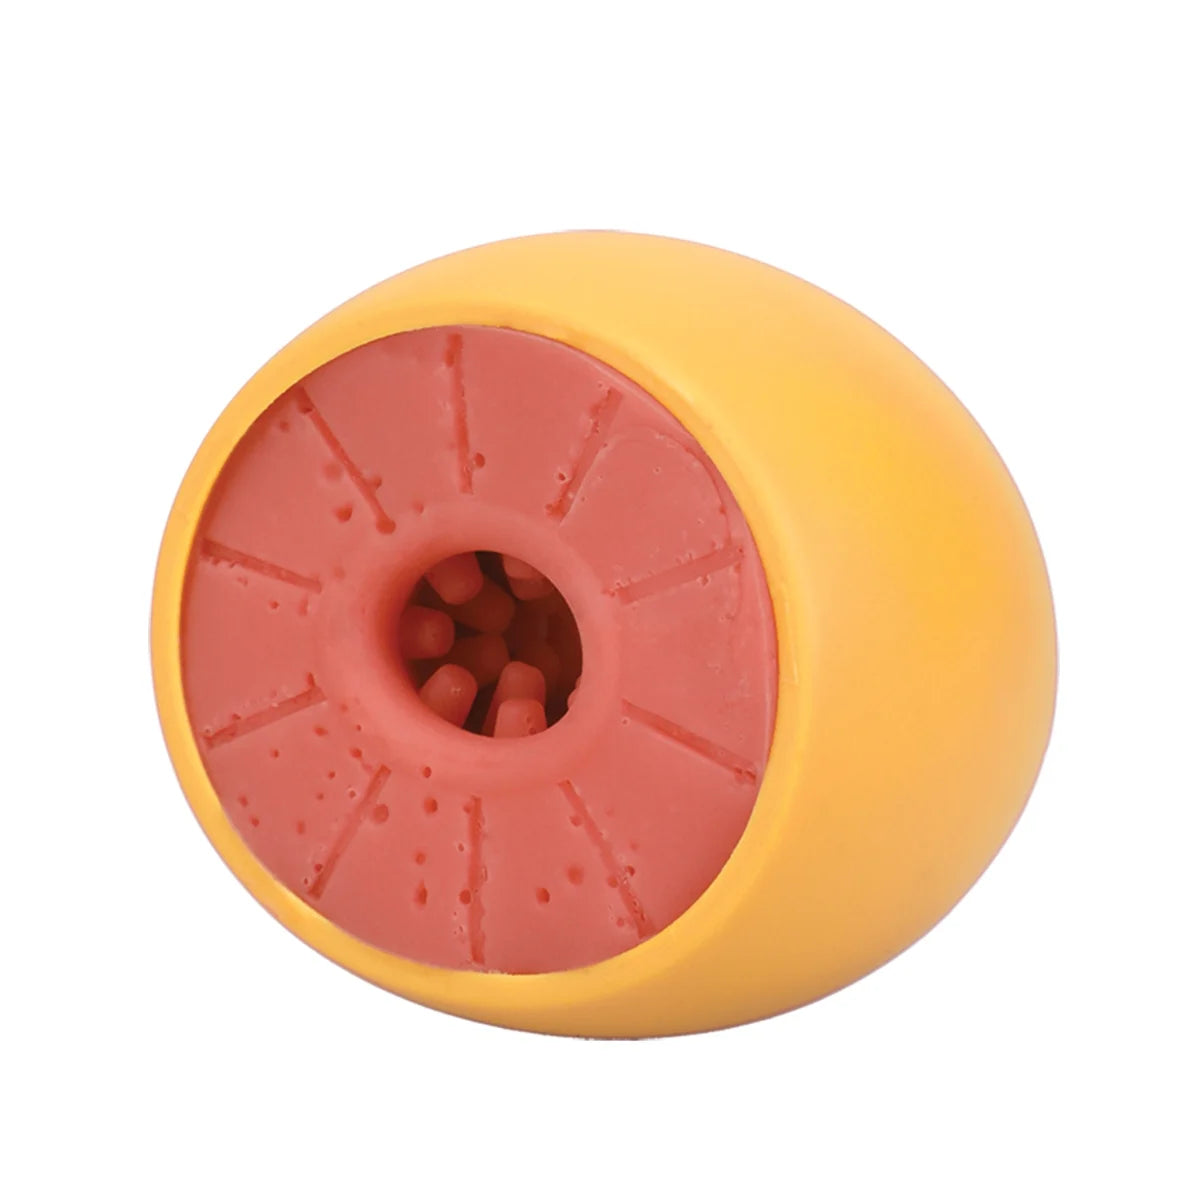 a yellow plastic object with a hole in it